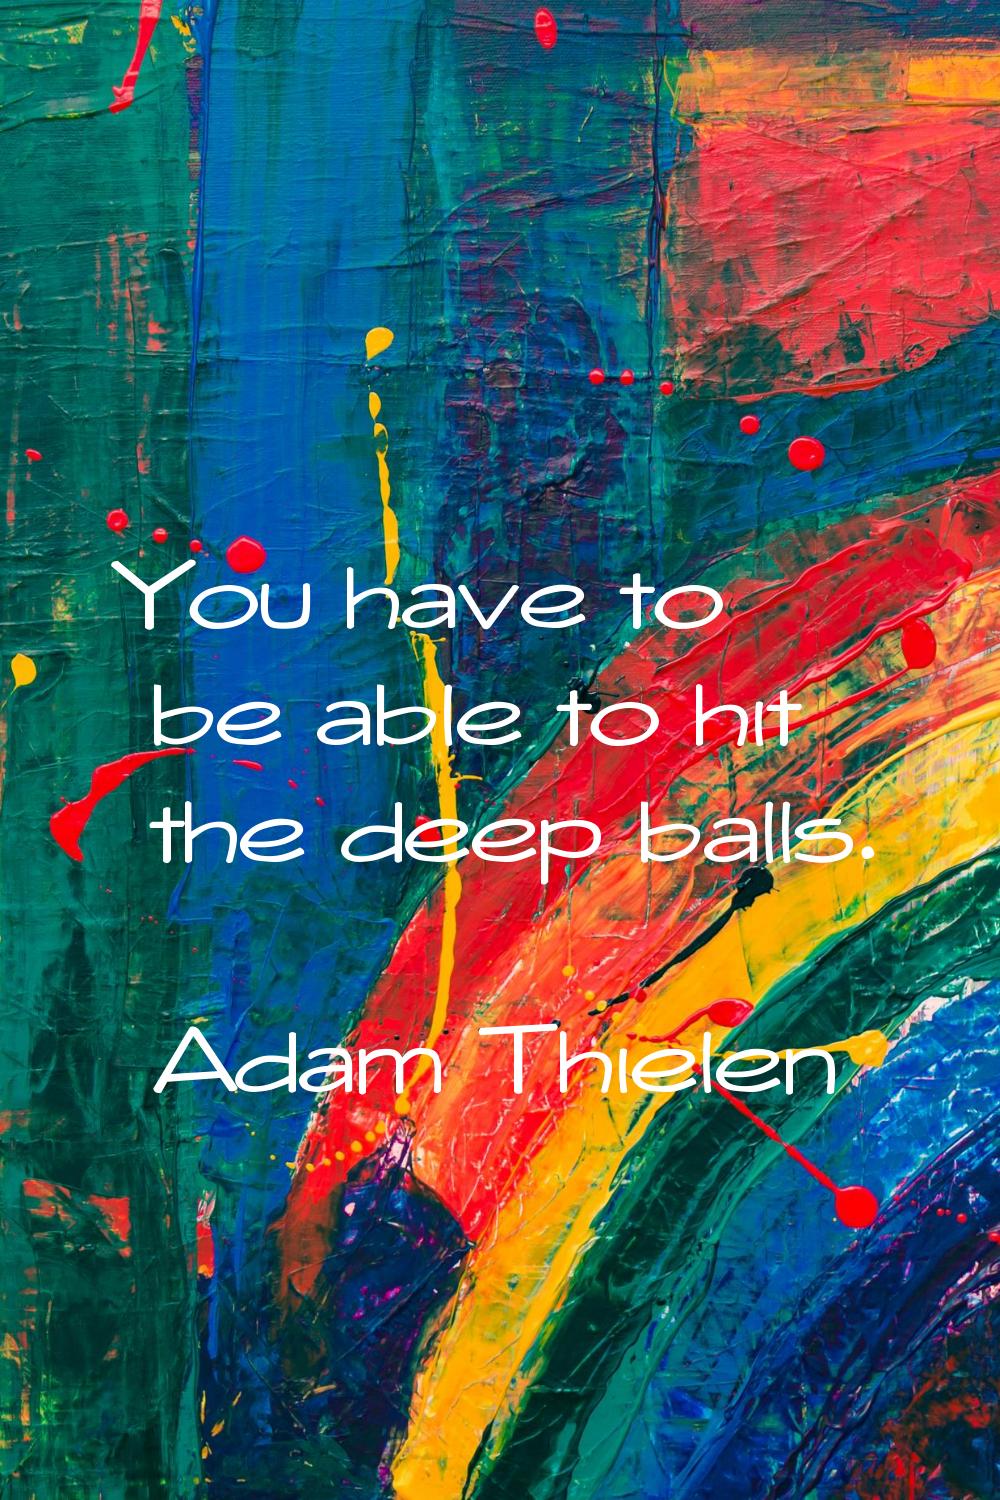 You have to be able to hit the deep balls.